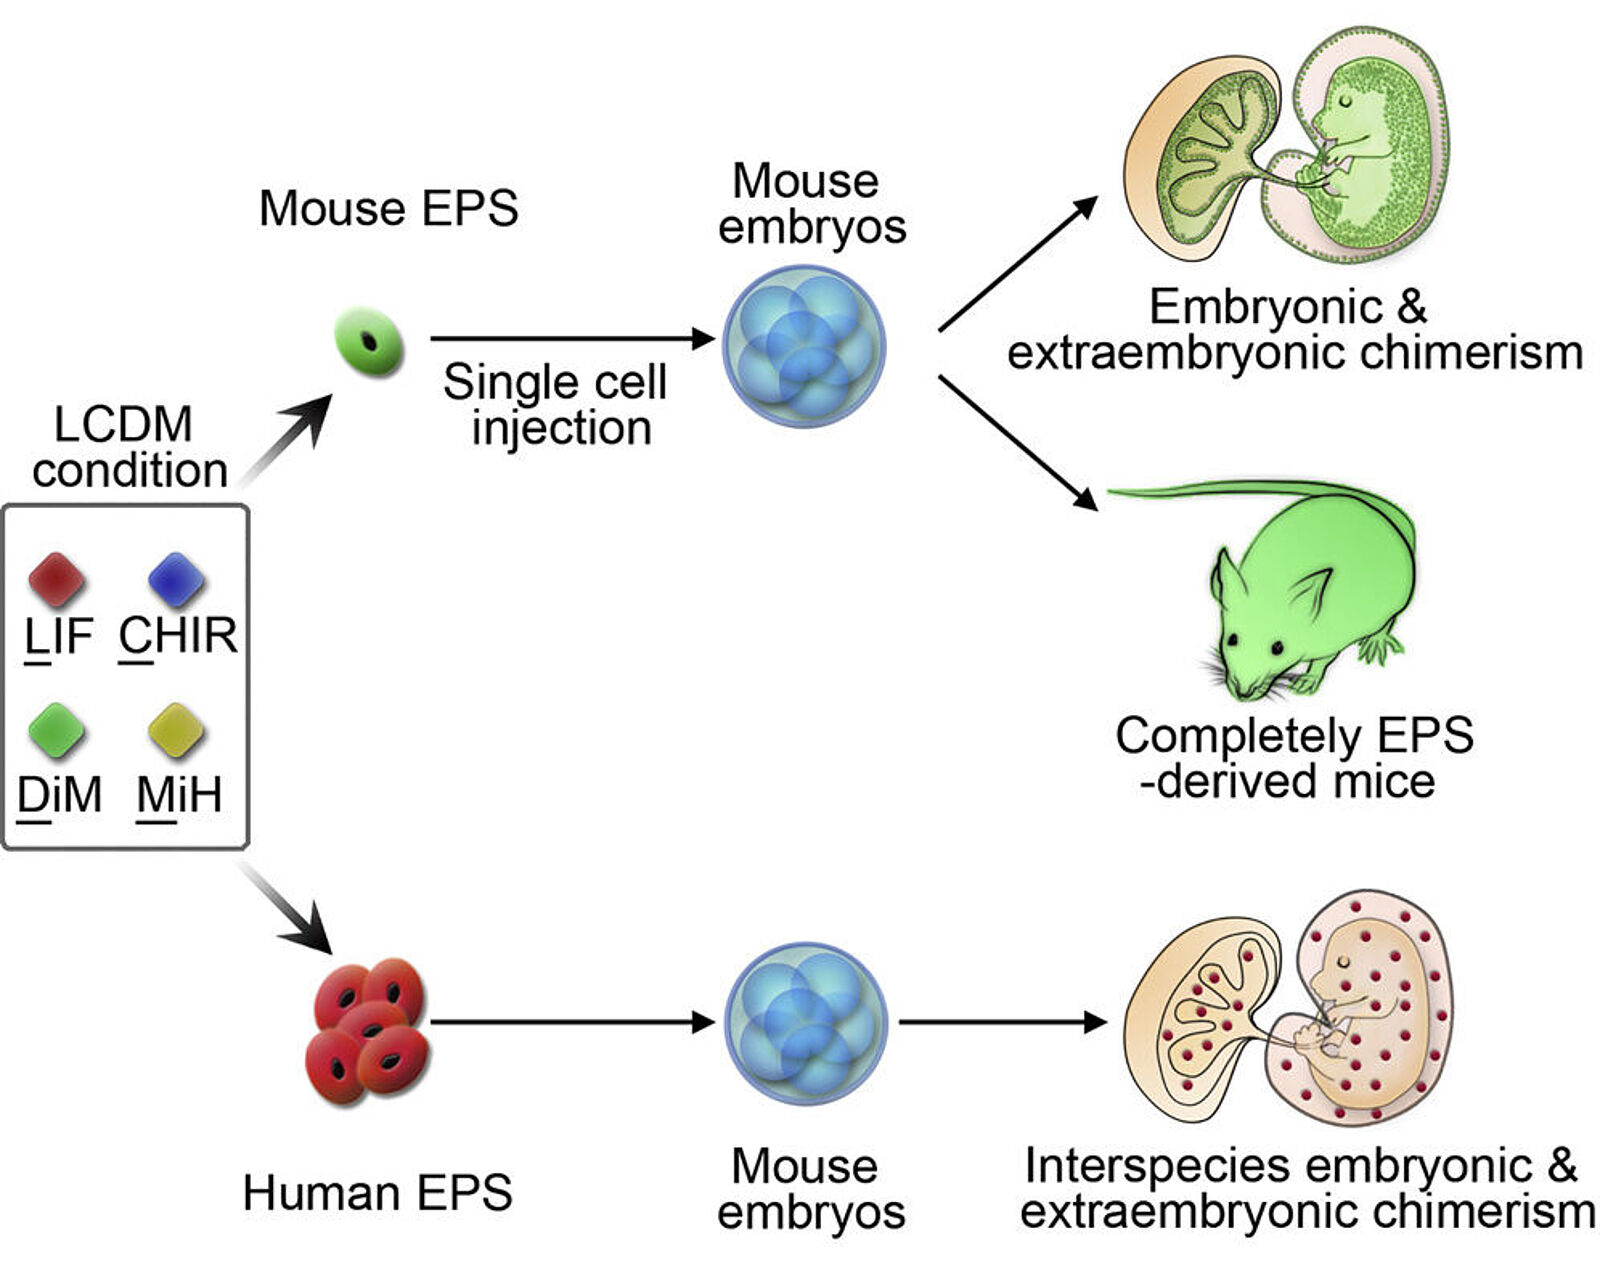 embryonic stem cell diagram